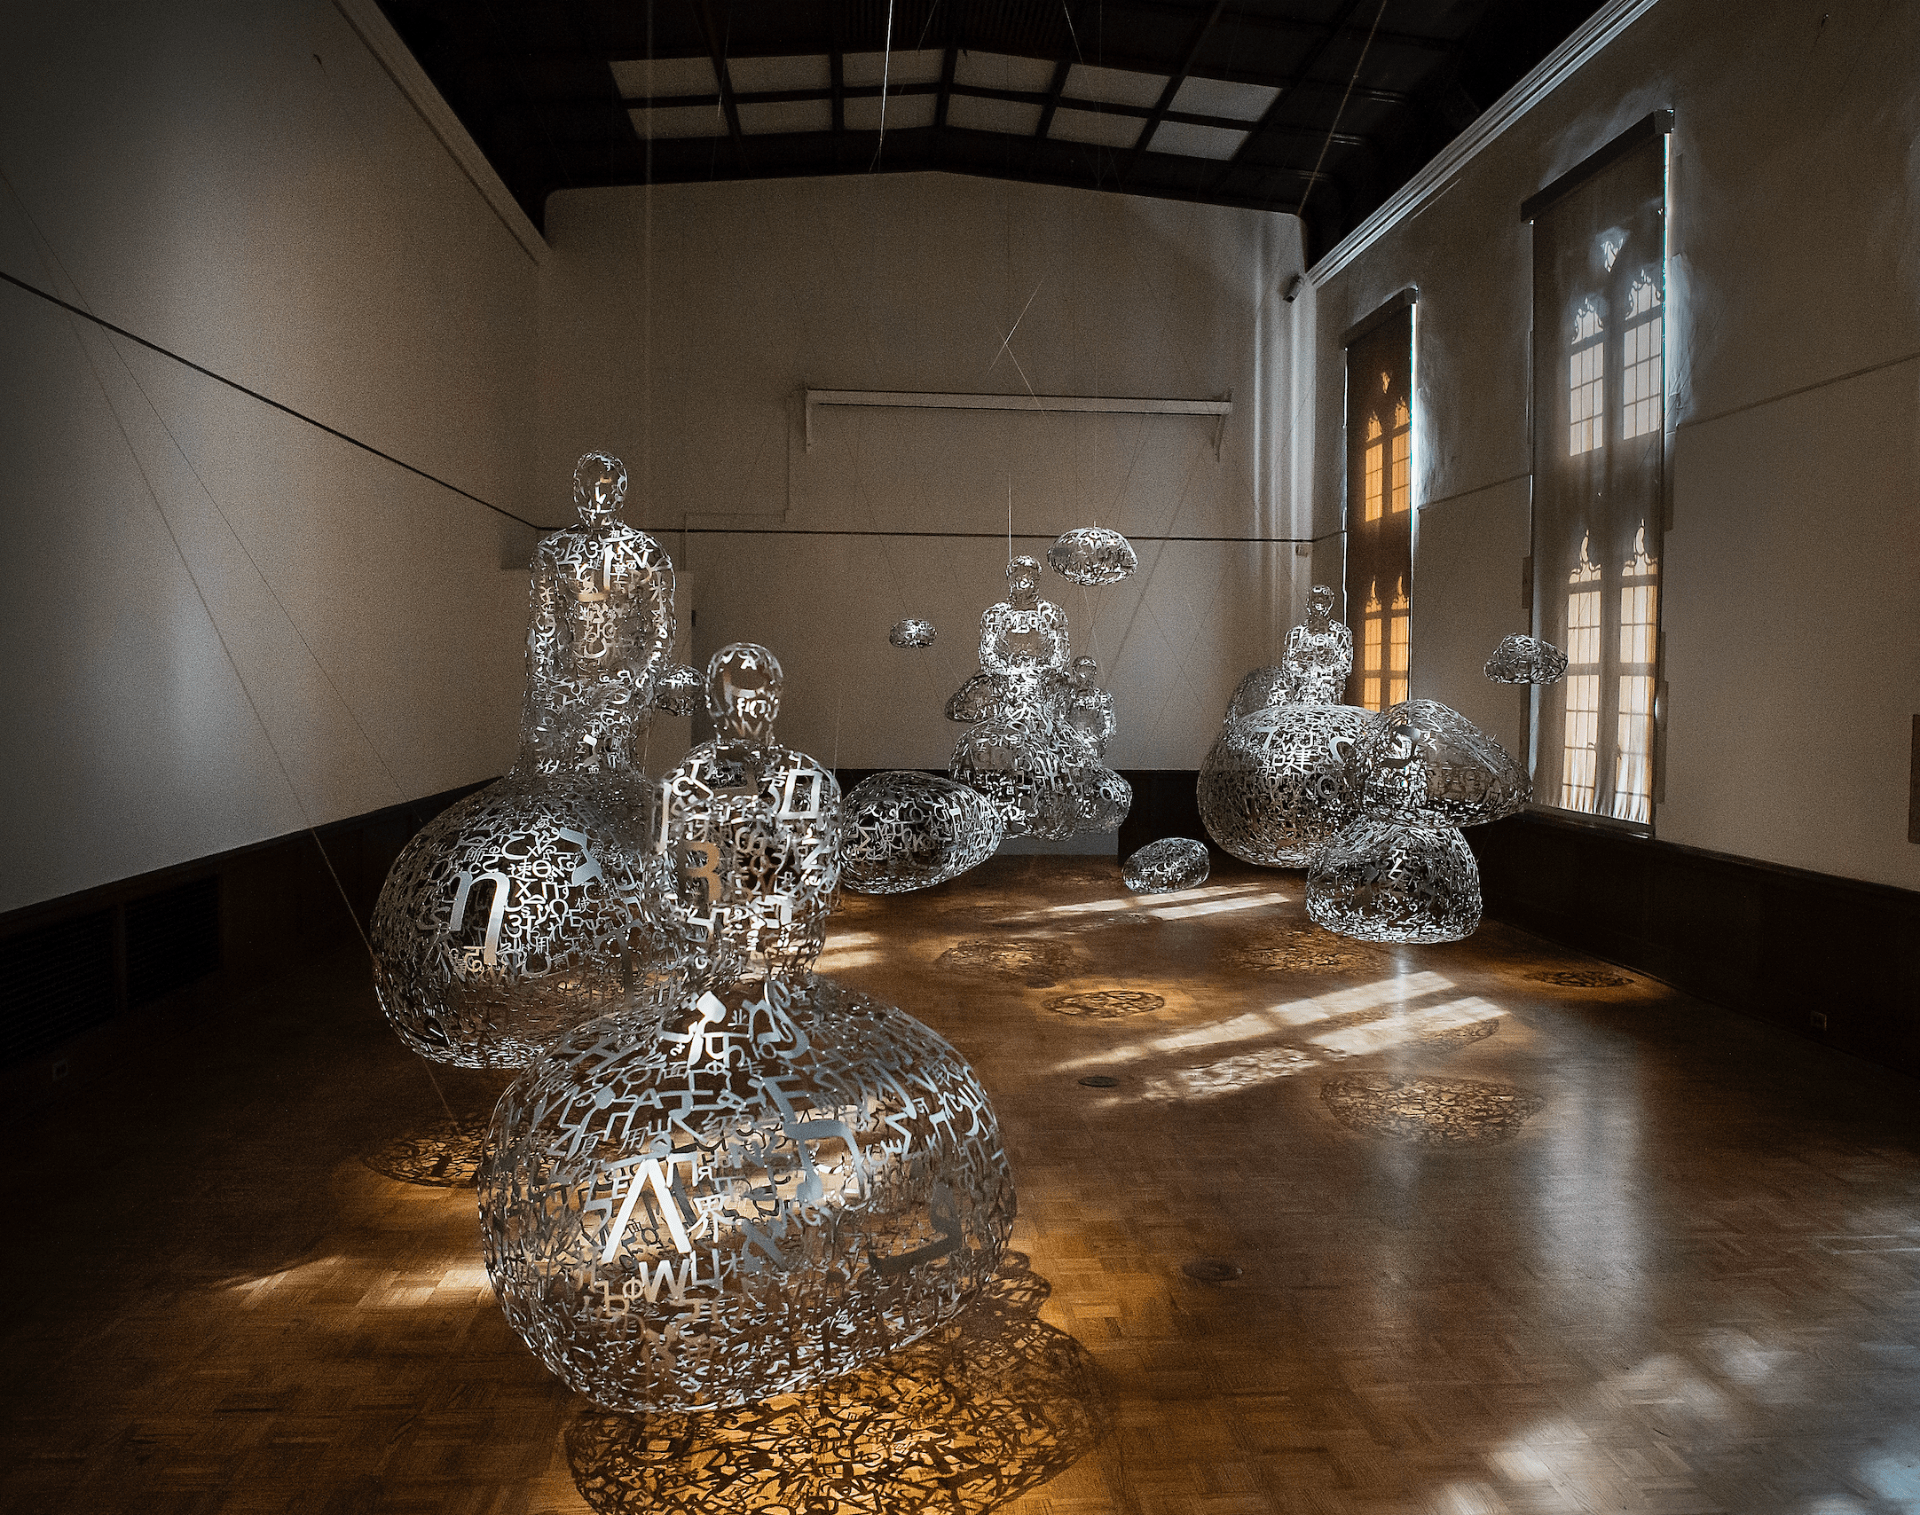 Jaume Plensa: Talking Continents at the Arthur Ross Gallery | Spiegel ...